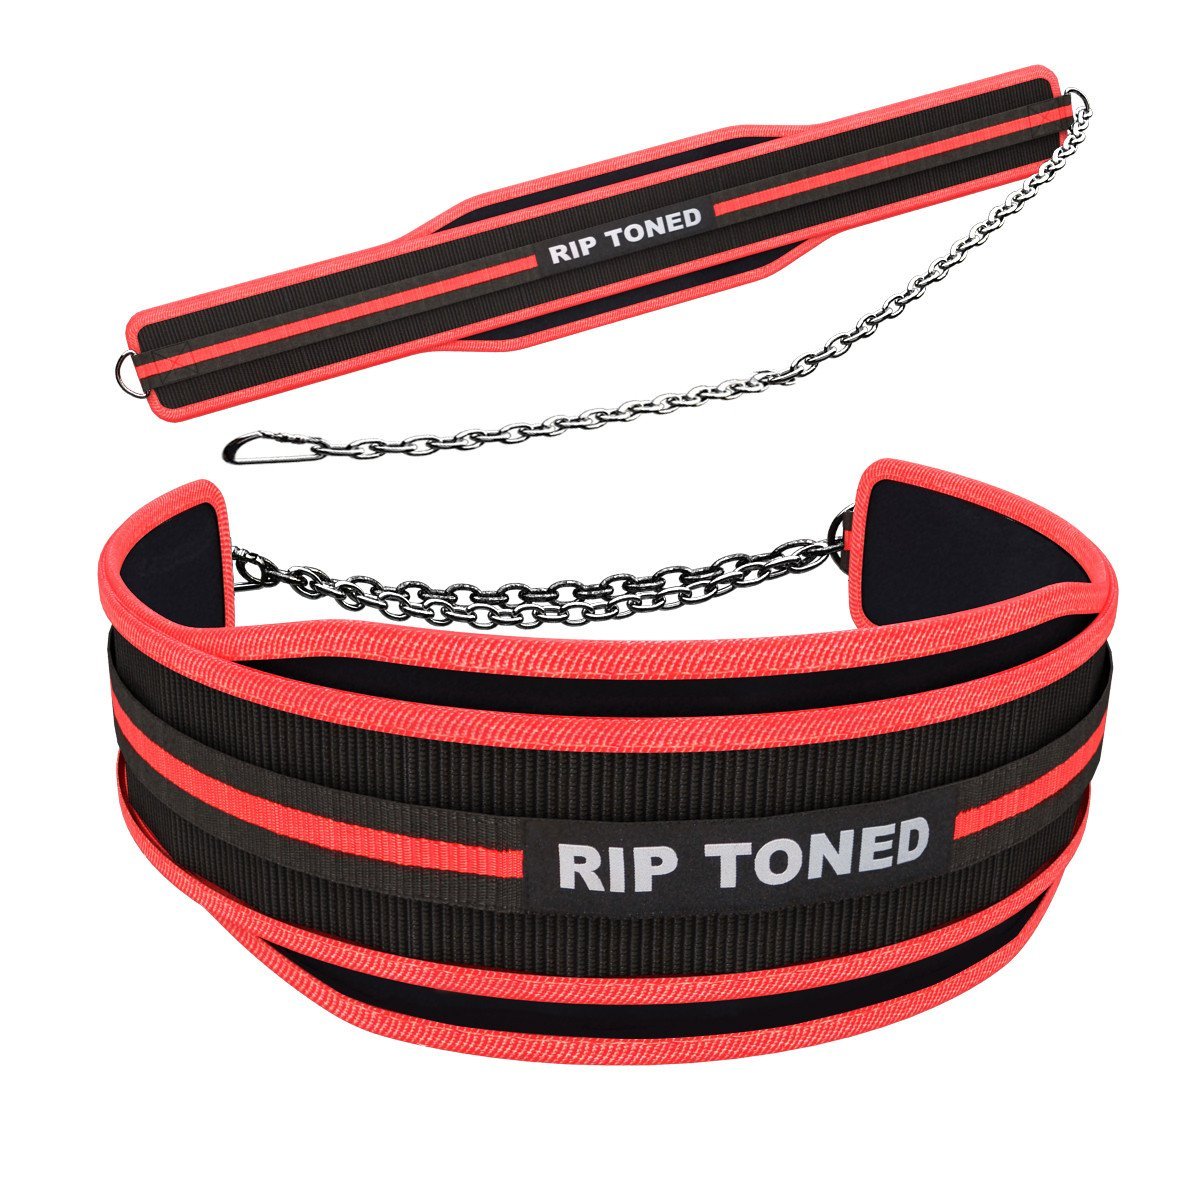 Rip Toned Dip Belt for Weight lifting, Pull Ups, Palestine